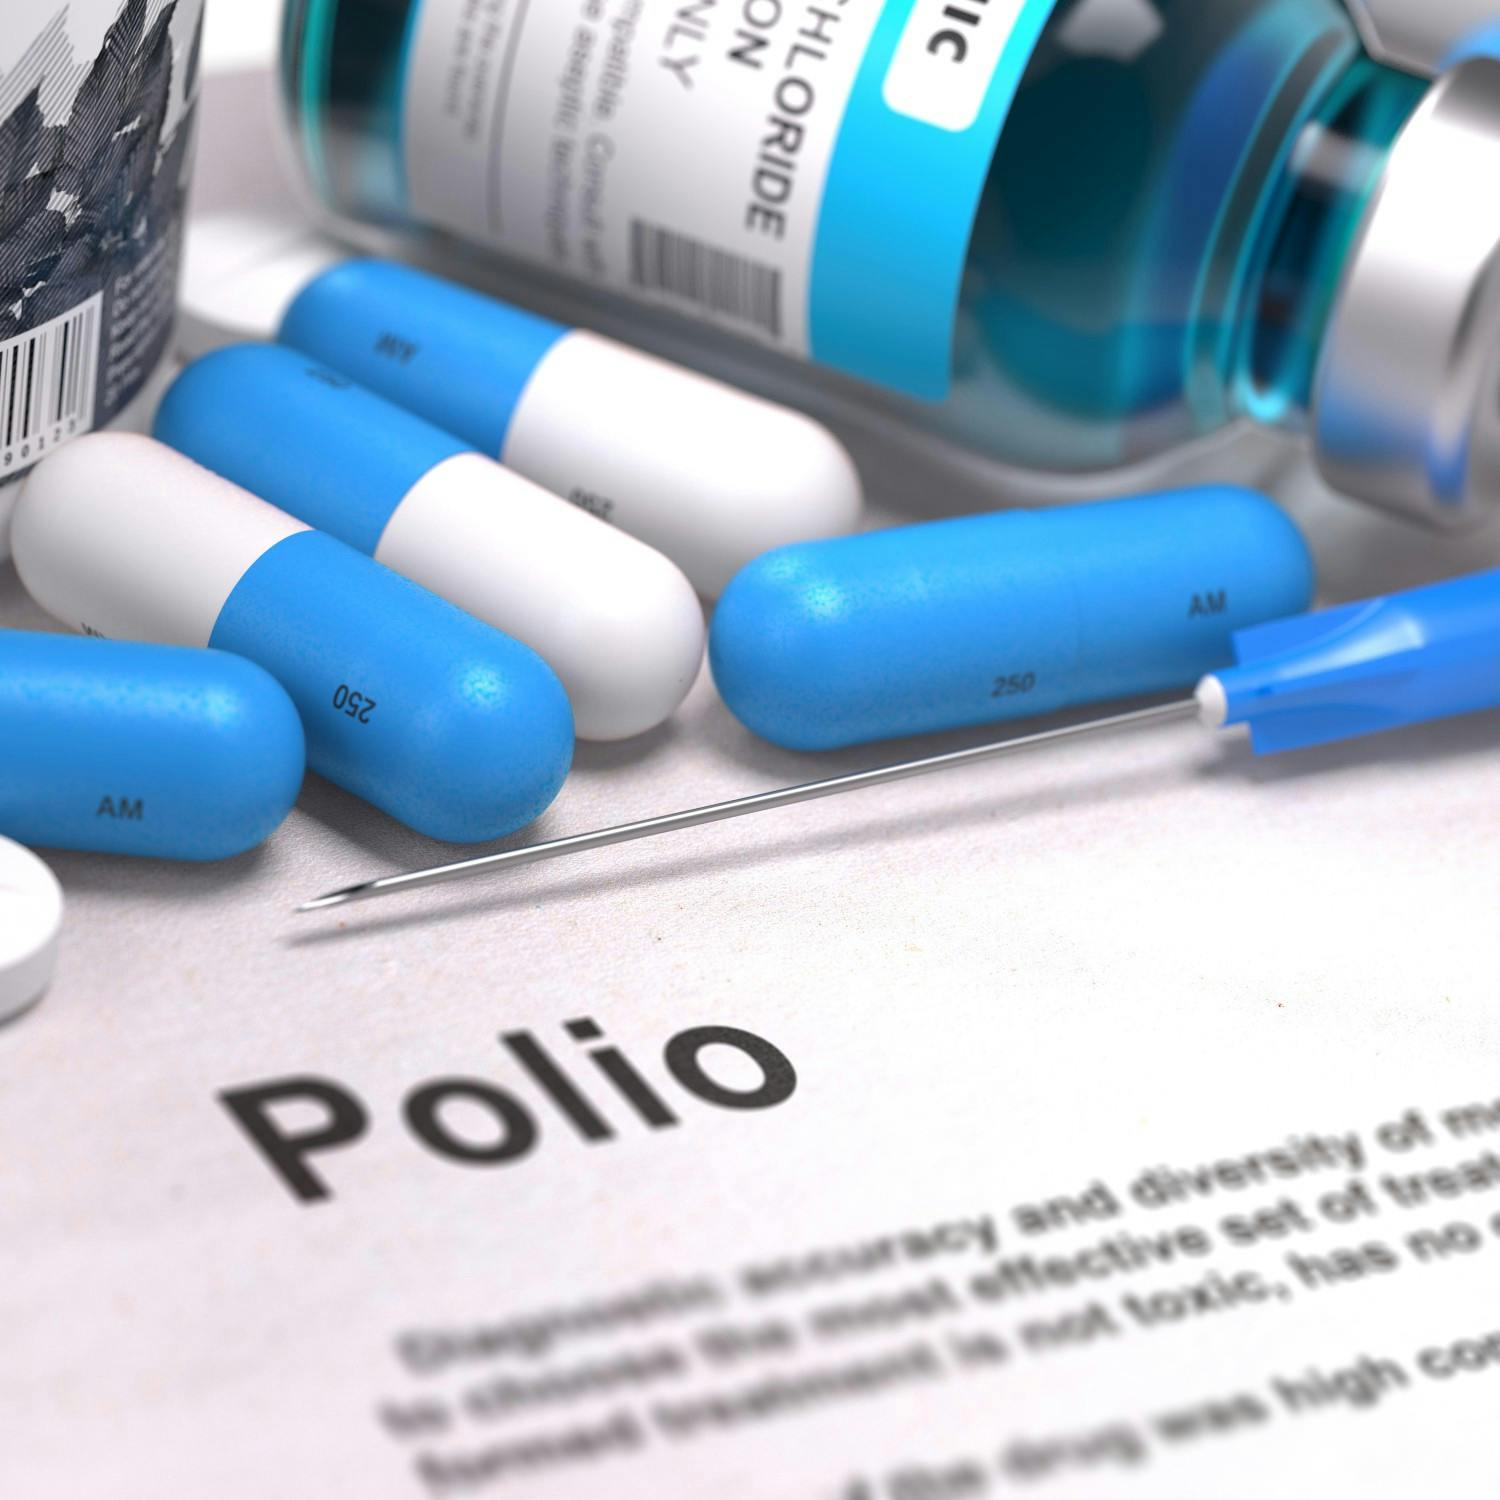 Science With Luke: Polio is becoming a concern again in the UK